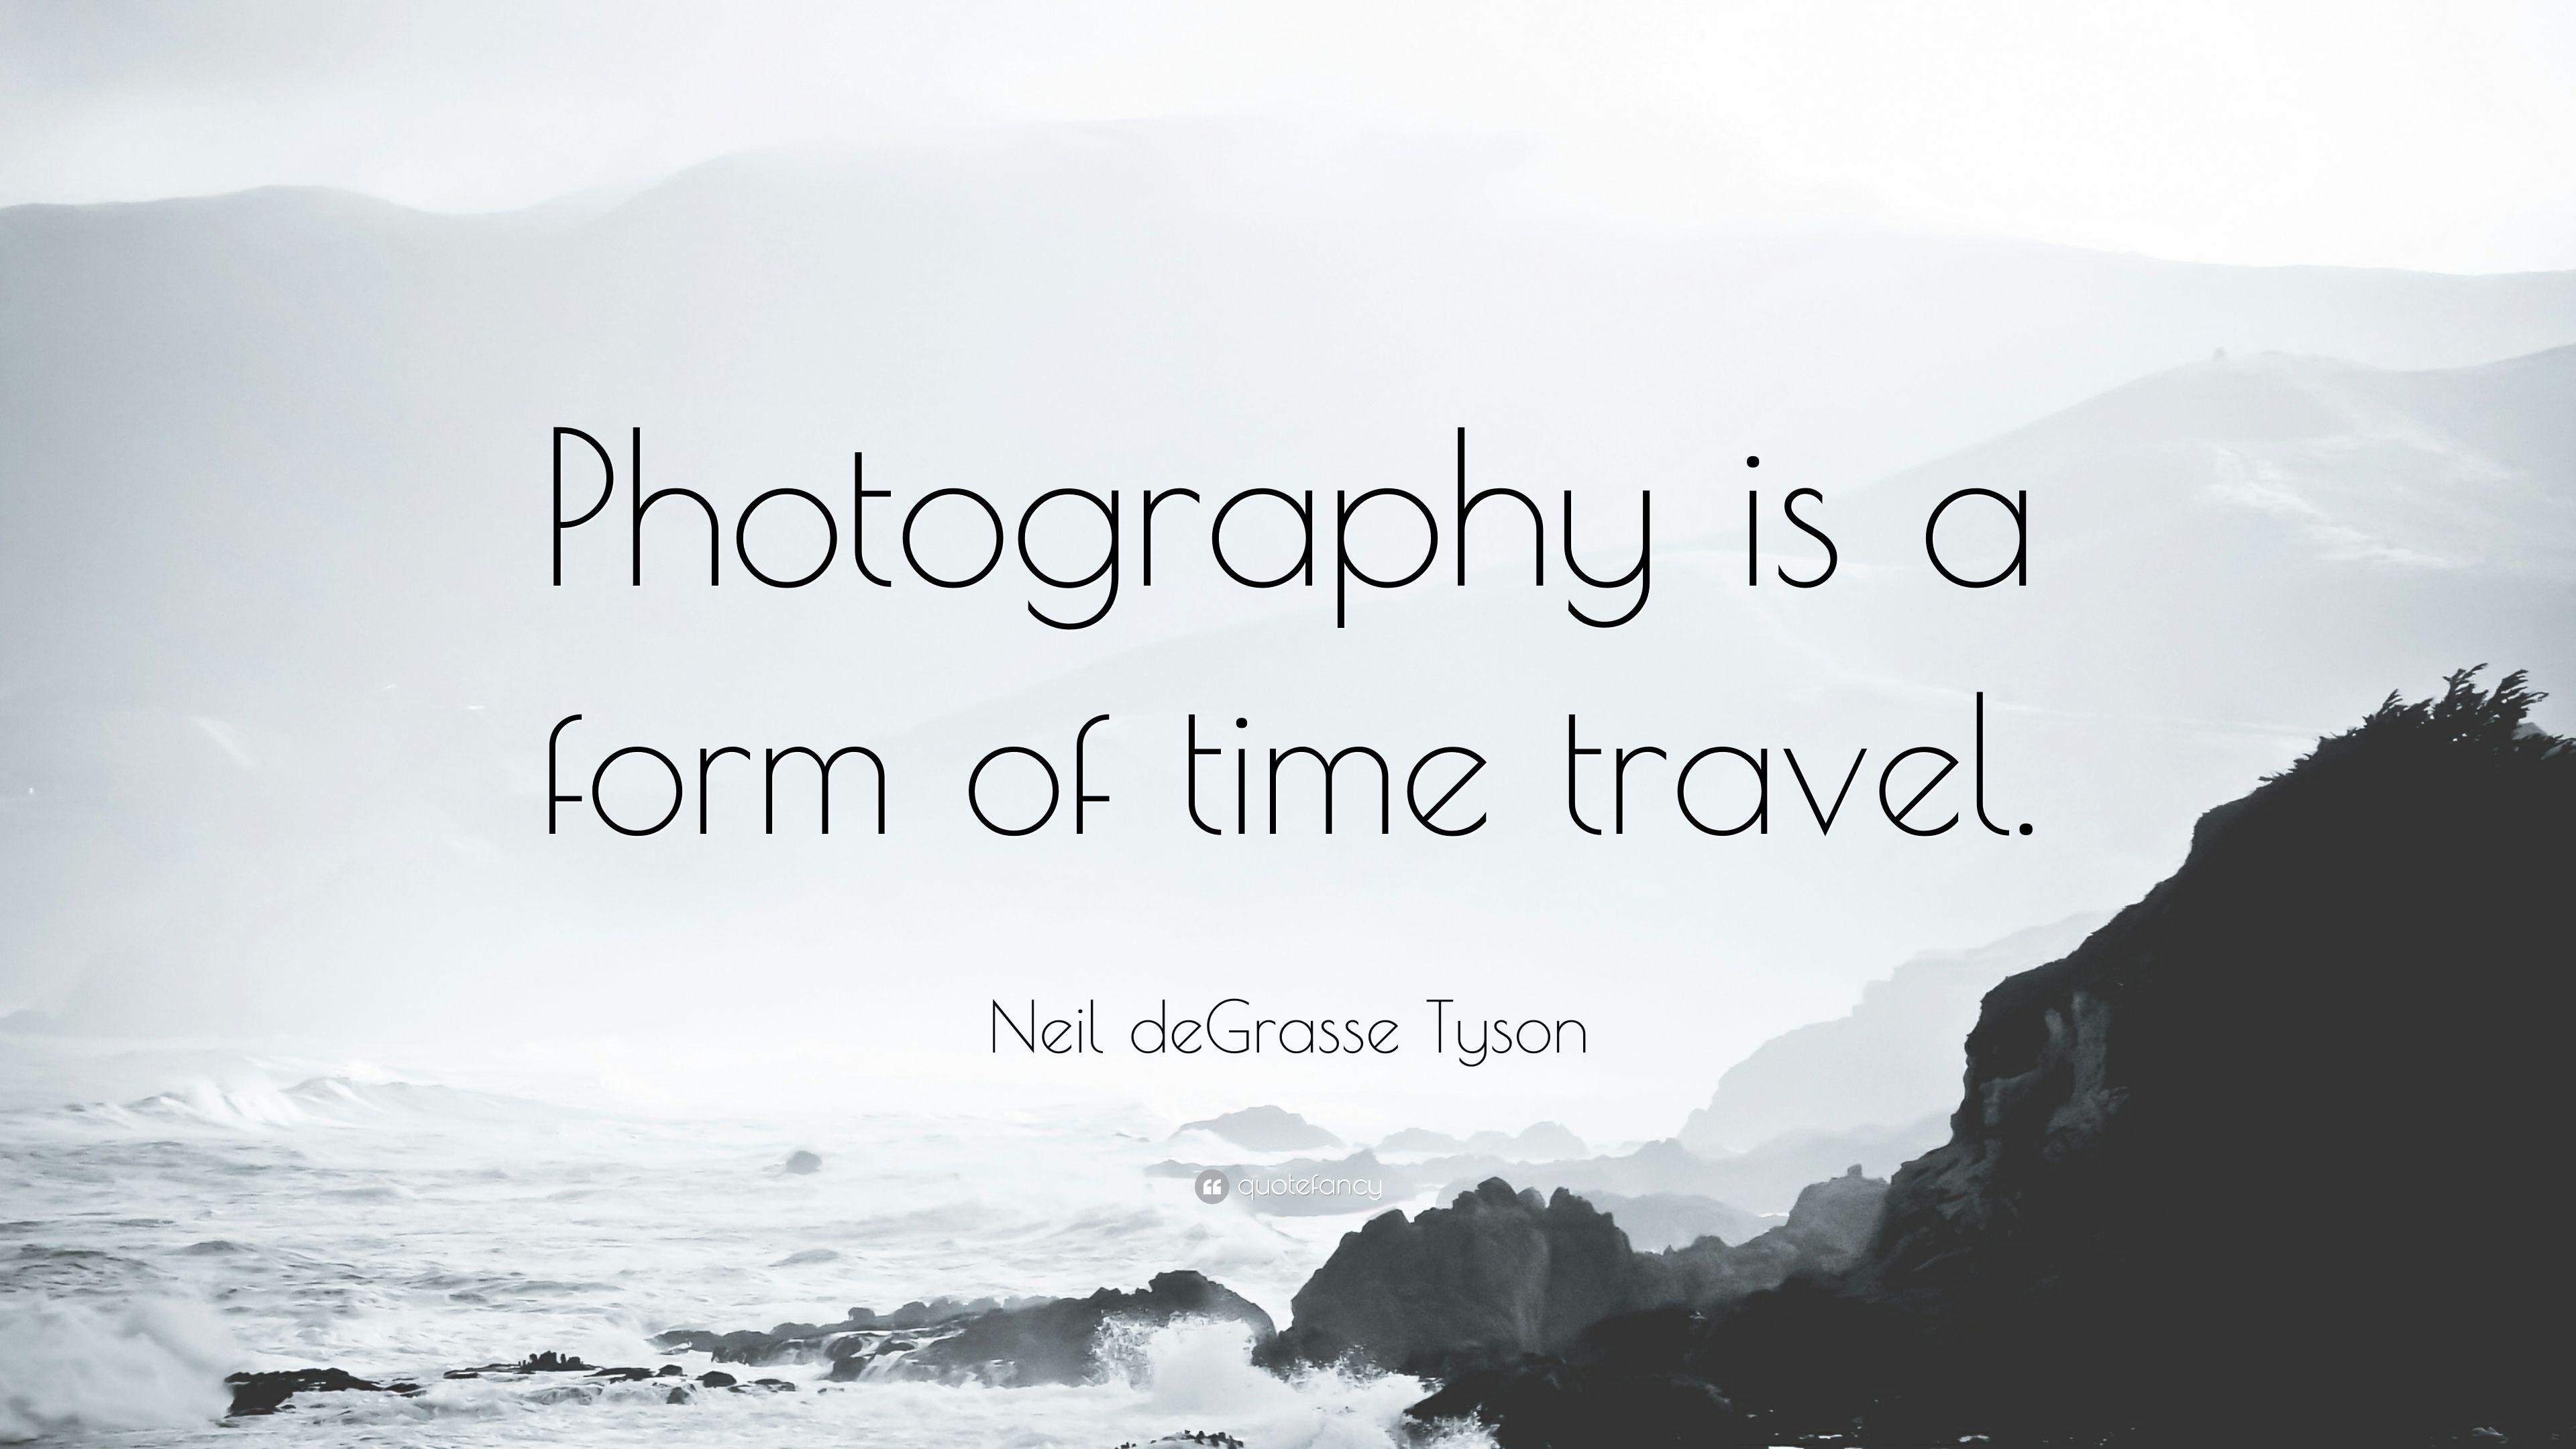 Neil deGrasse Tyson Quote: “Photography is a form of time travel